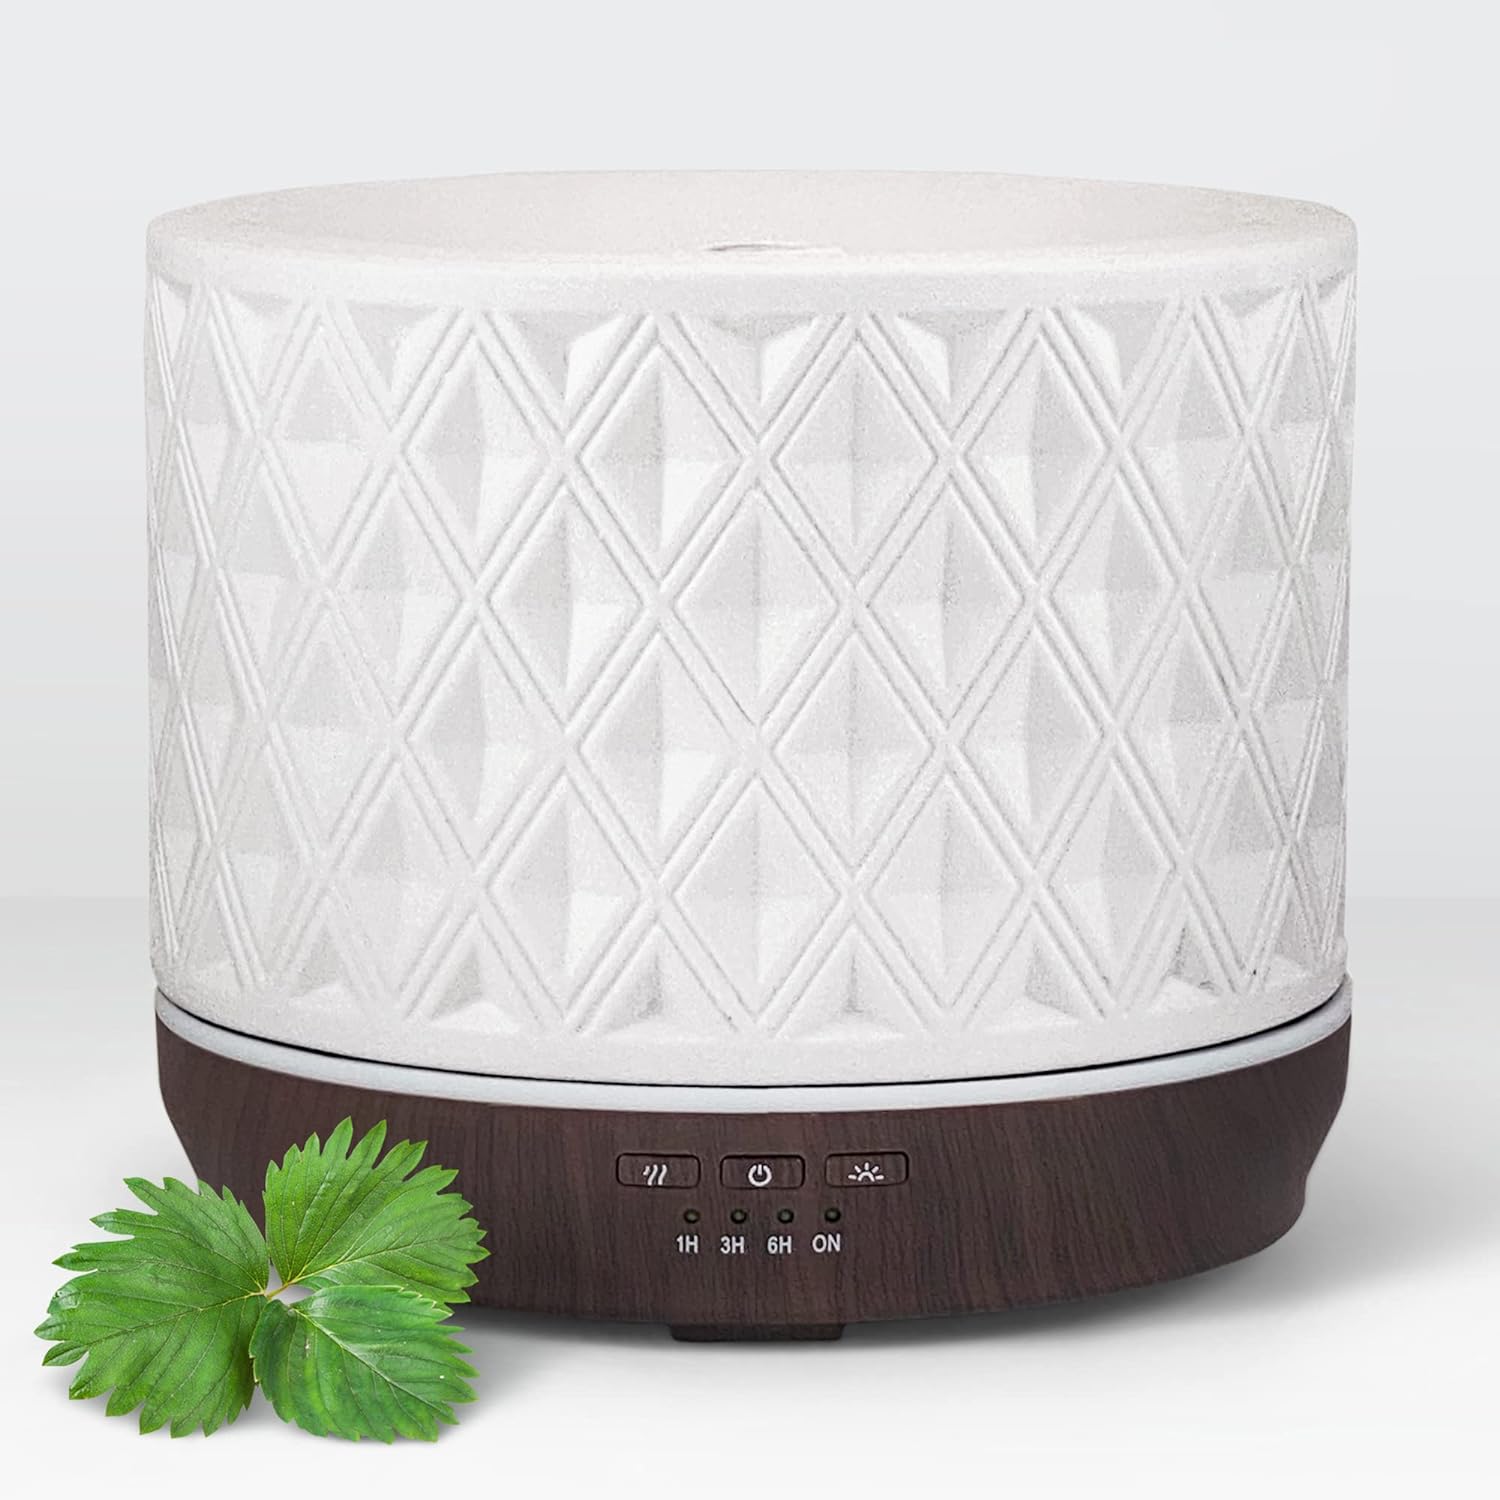 I love the choice of colored lighting and the timed options. The essential oils that I have purchased for this diffuser are so calming. Exactly what I needed. I have one at home and one at work.